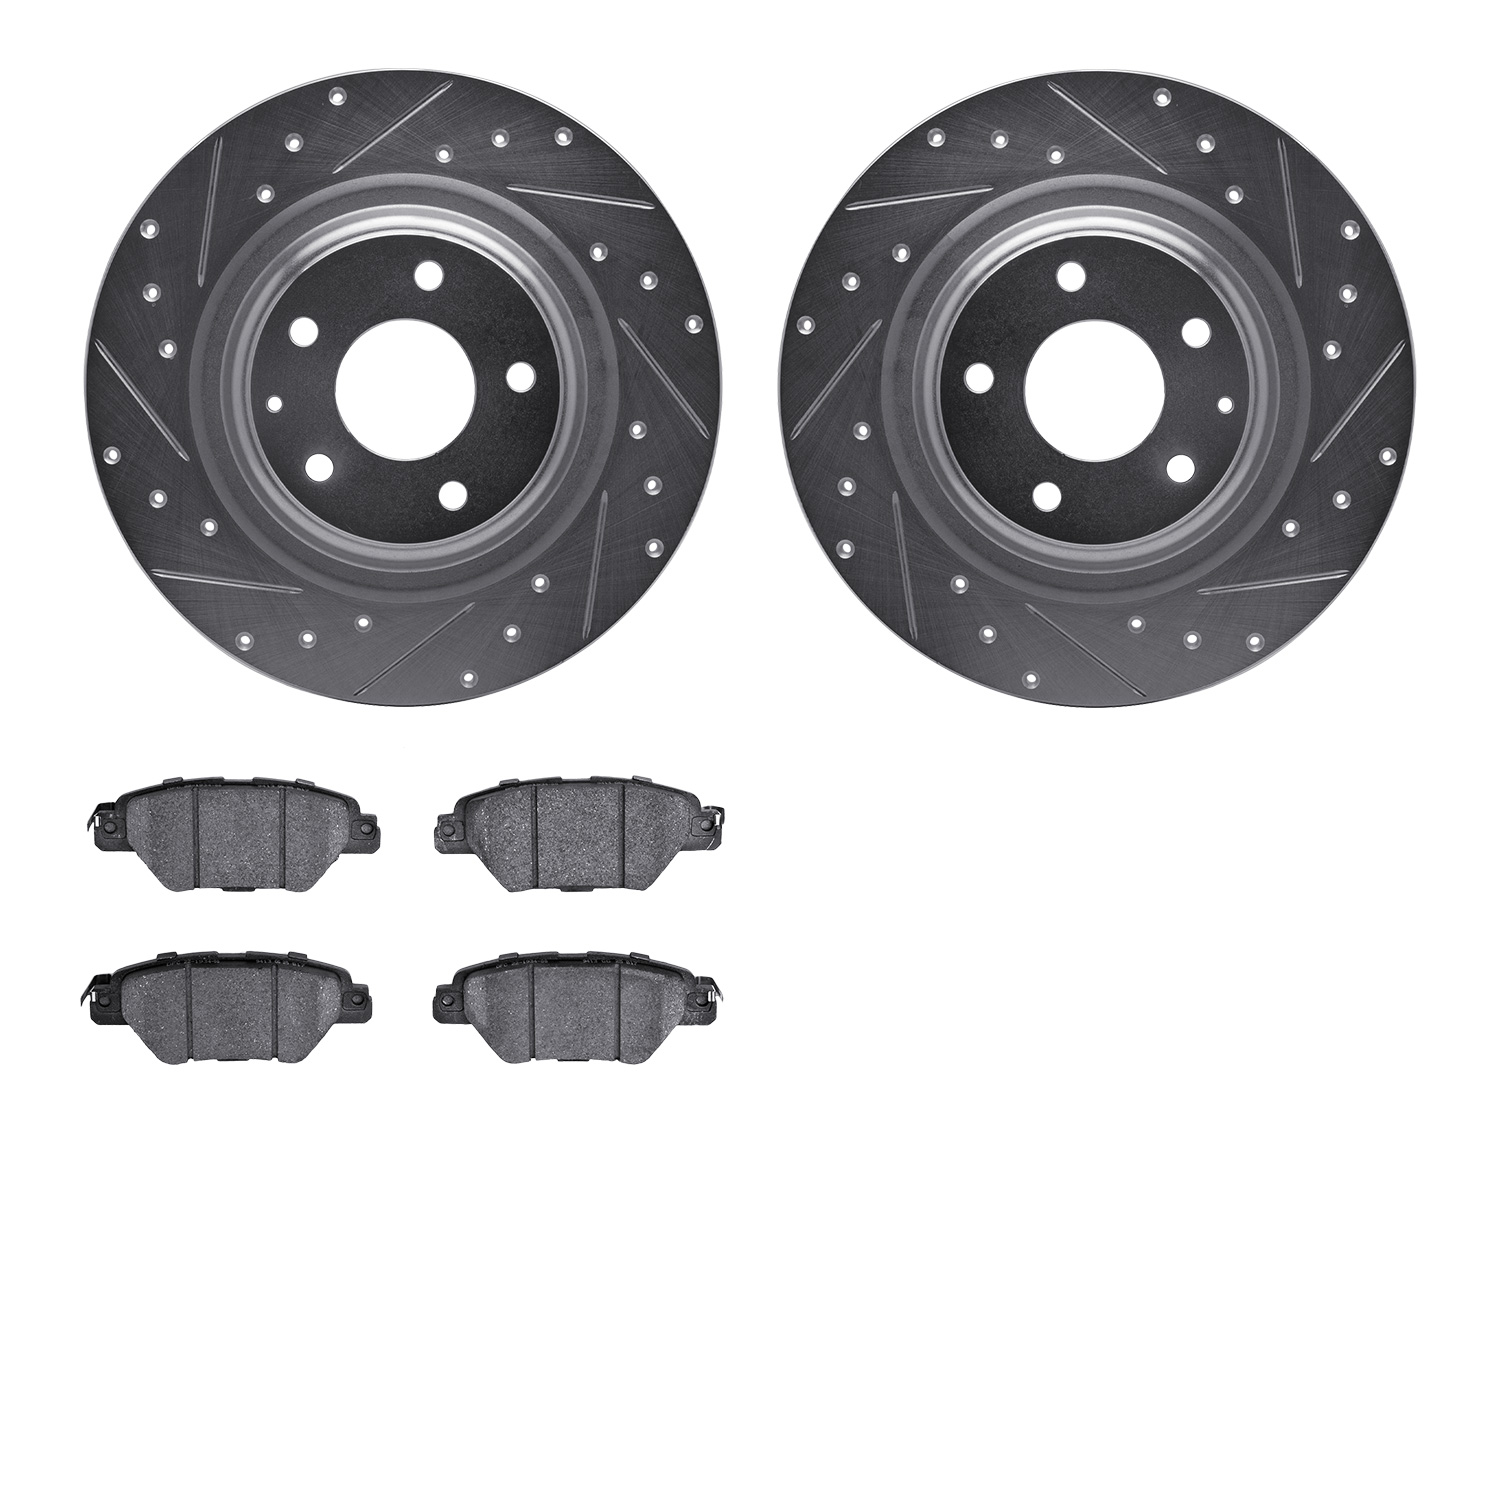 7502-80087 Drilled/Slotted Brake Rotors w/5000 Advanced Brake Pads Kit [Silver], Fits Select Ford/Lincoln/Mercury/Mazda, Positio